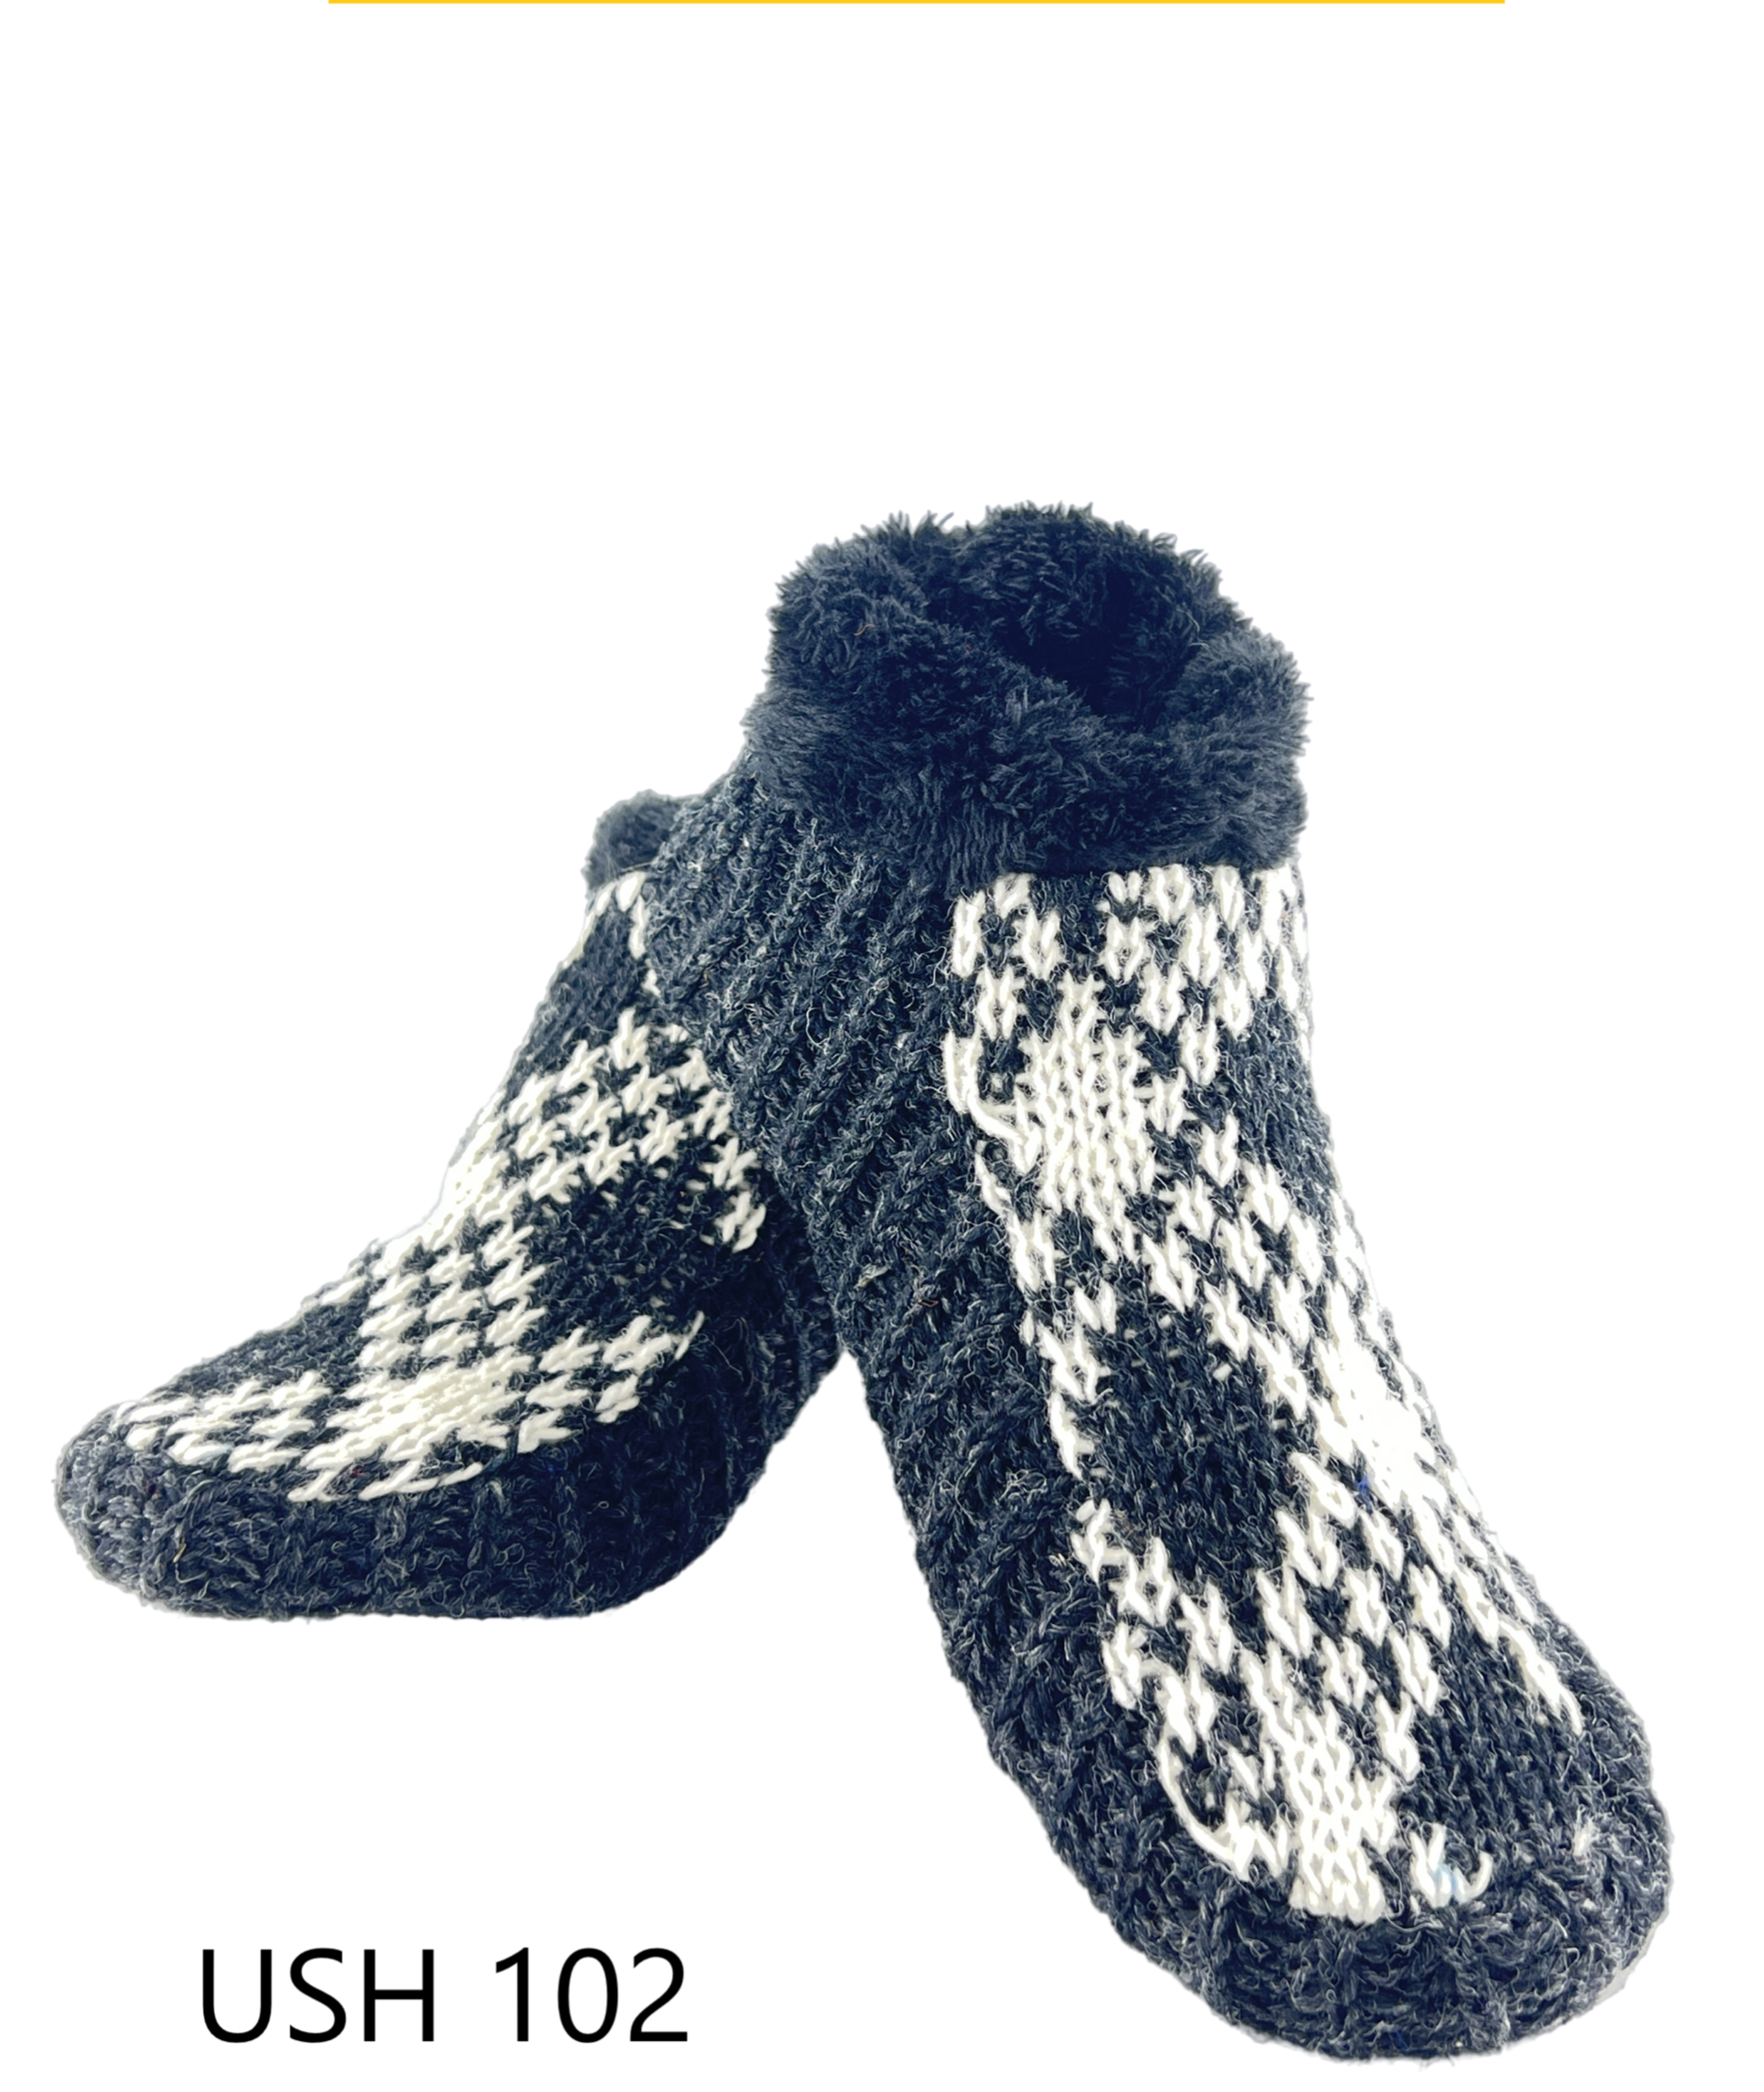 Anti-slip Woolen booties | Cute slippers |Cozy Wool Slippers for Home | Cute Ankle Length House Slippers for Men & Women| Fur slippers